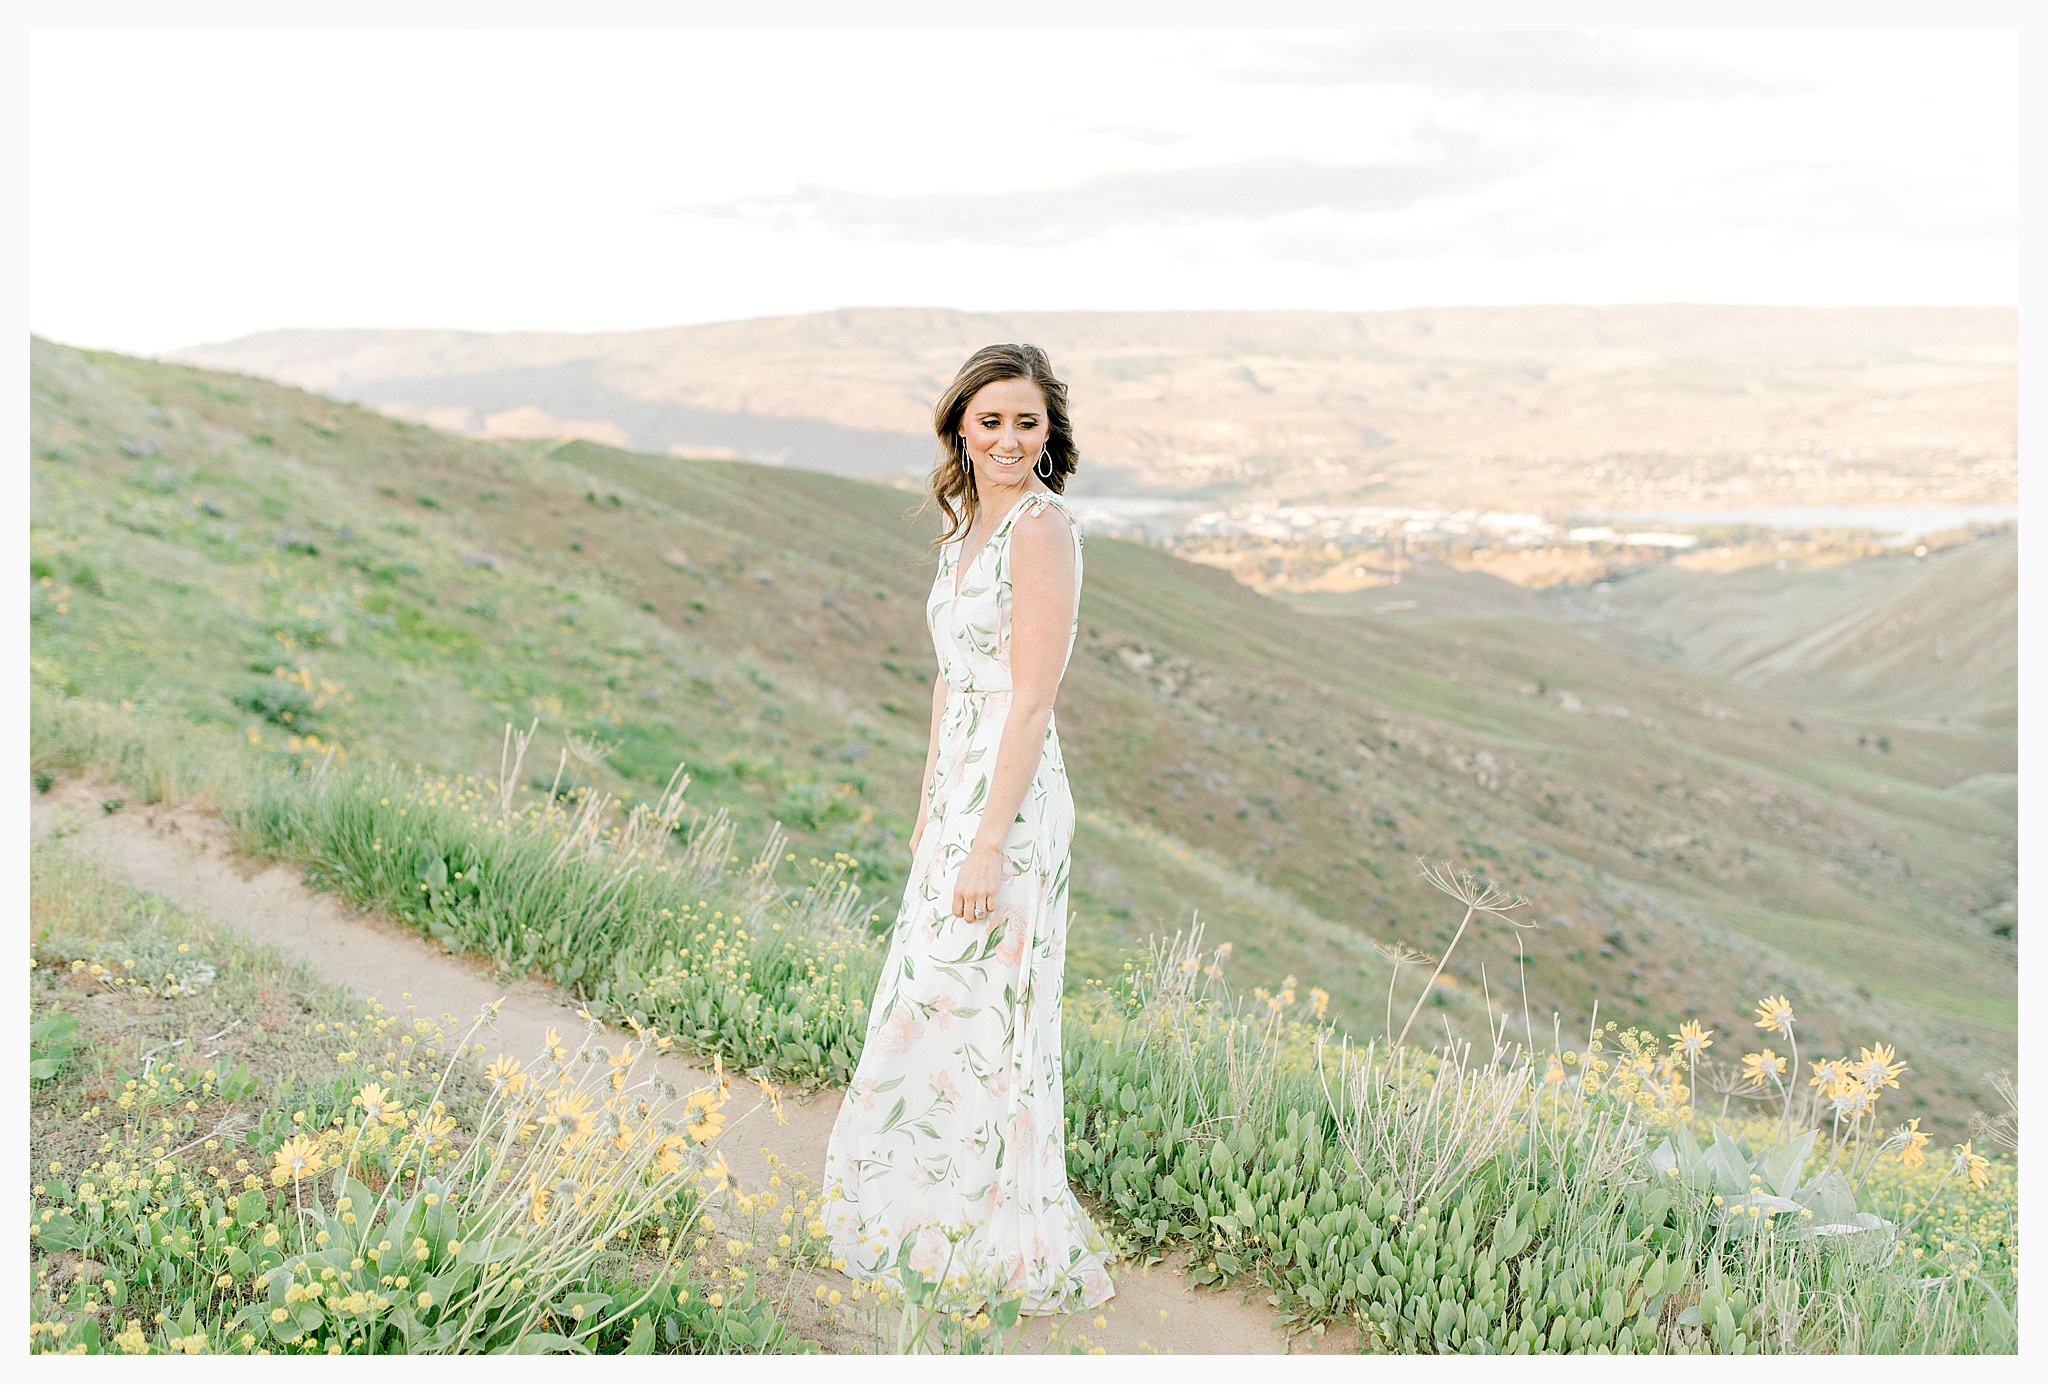 Engagement session amongst the wildflowers in Wenatchee, Washington | Engagement Session Outfit Inspiration for Wedding Photography with Emma Rose Company | Light and Airy PNW Photographer, Seattle Bride_0016.jpg